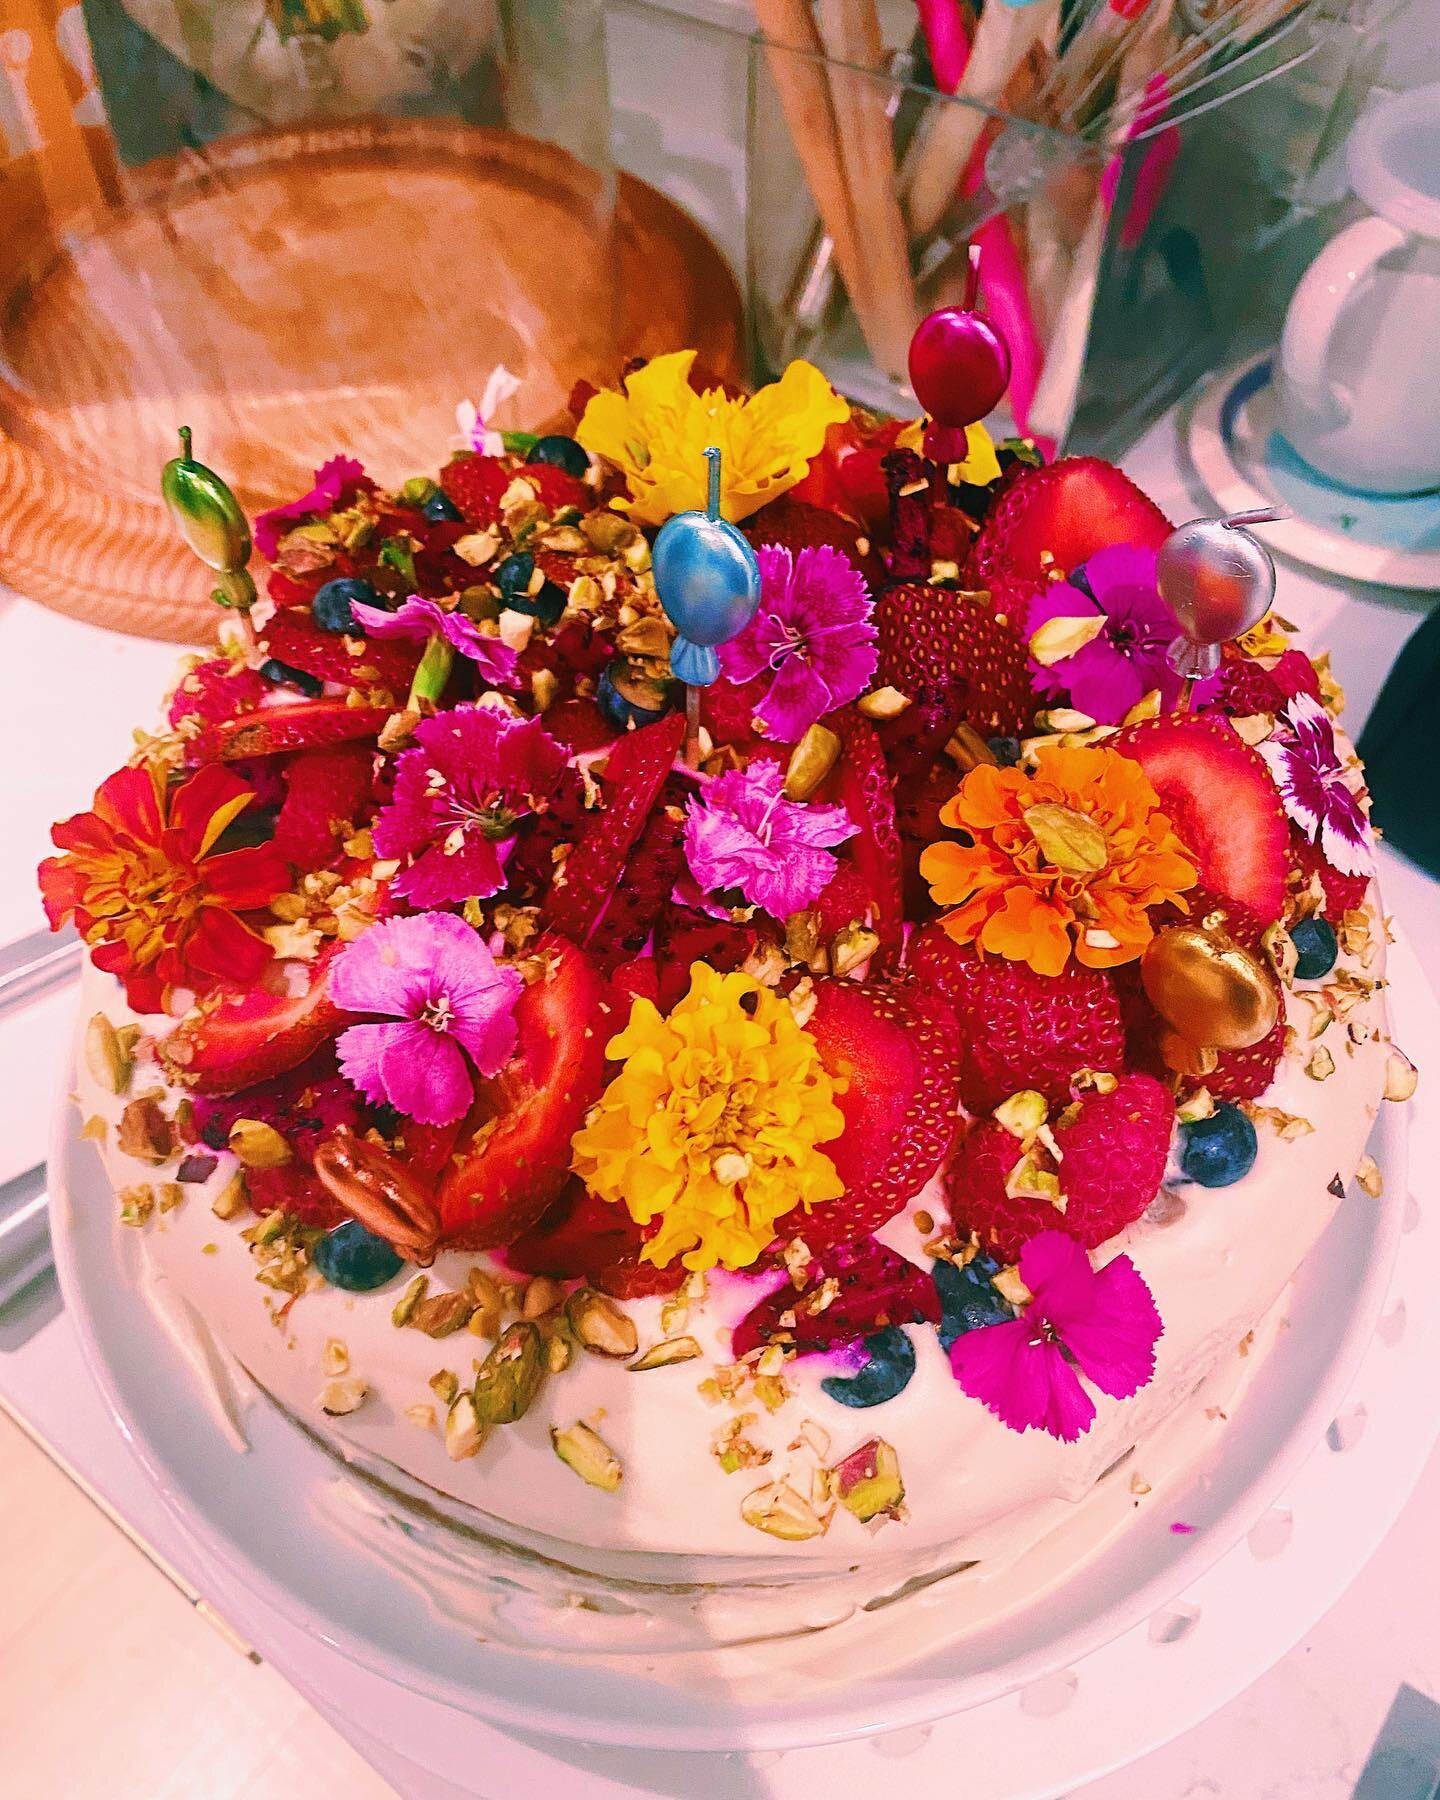 Fairy Cake 🧚🏽🎂🌸🌷🍃🍡 yesterday I made a fluffy coconut-oat milk ( @chloerobilab ) icing, cake is vanilla with fruits, flowers, and green pistachios. #Vegan #GlutenFree #FlowerBomba #BirthdayCake #ChloeRobi 

@chloerobilab #ChloeRobi.com #Sustain